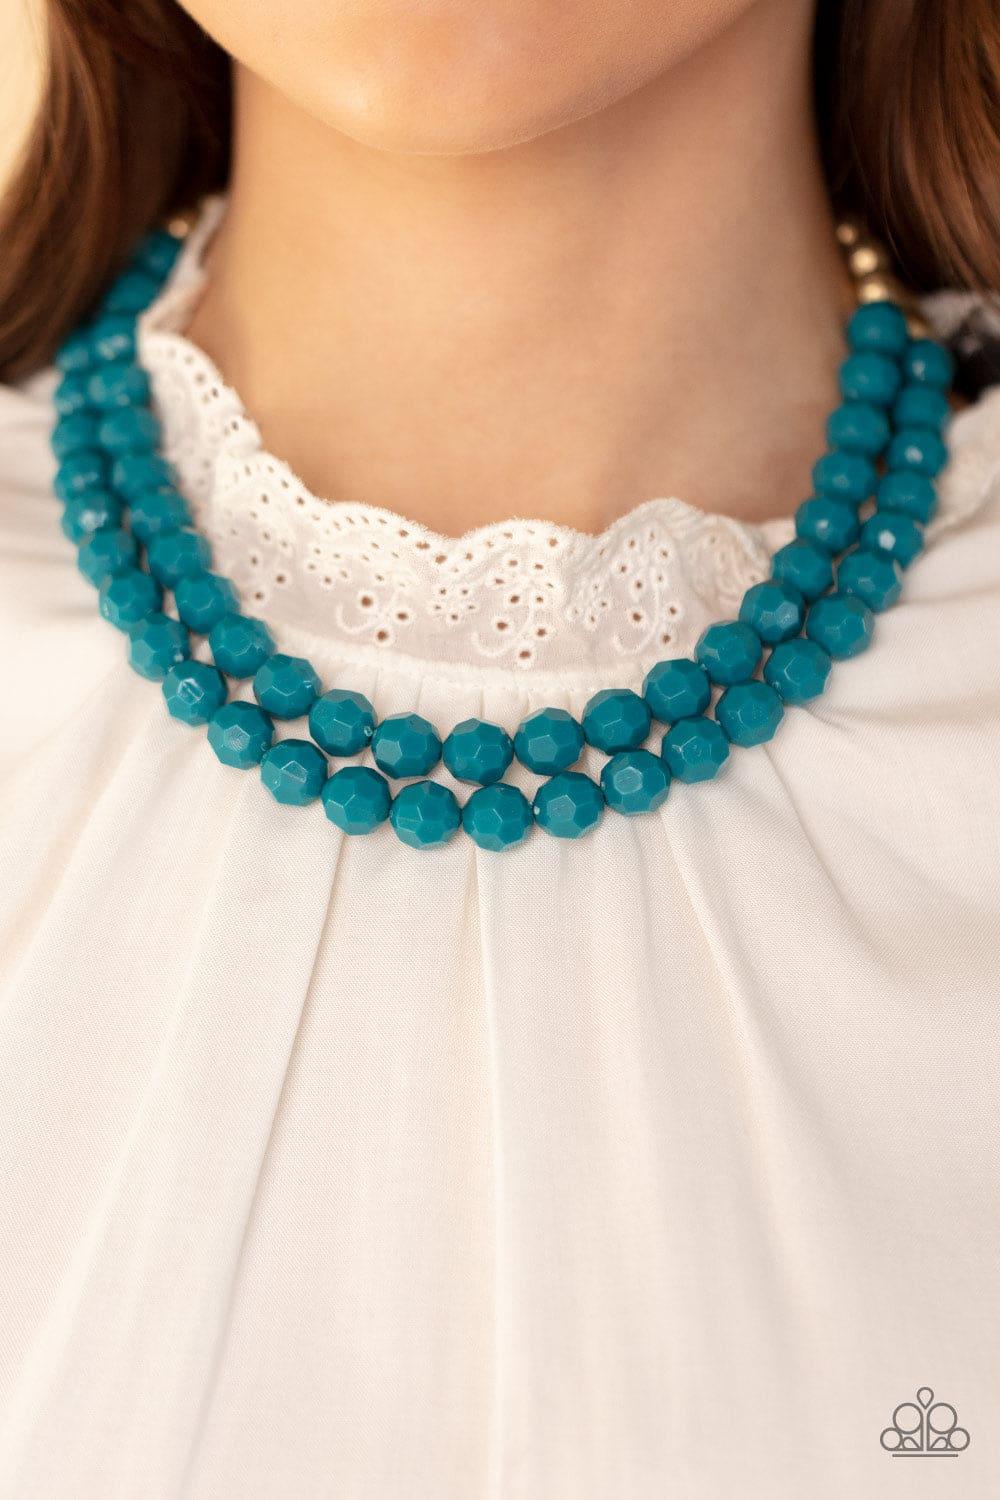 Paparazzi Accessories - Greco Getaway - Blue Necklace - Bling by JessieK